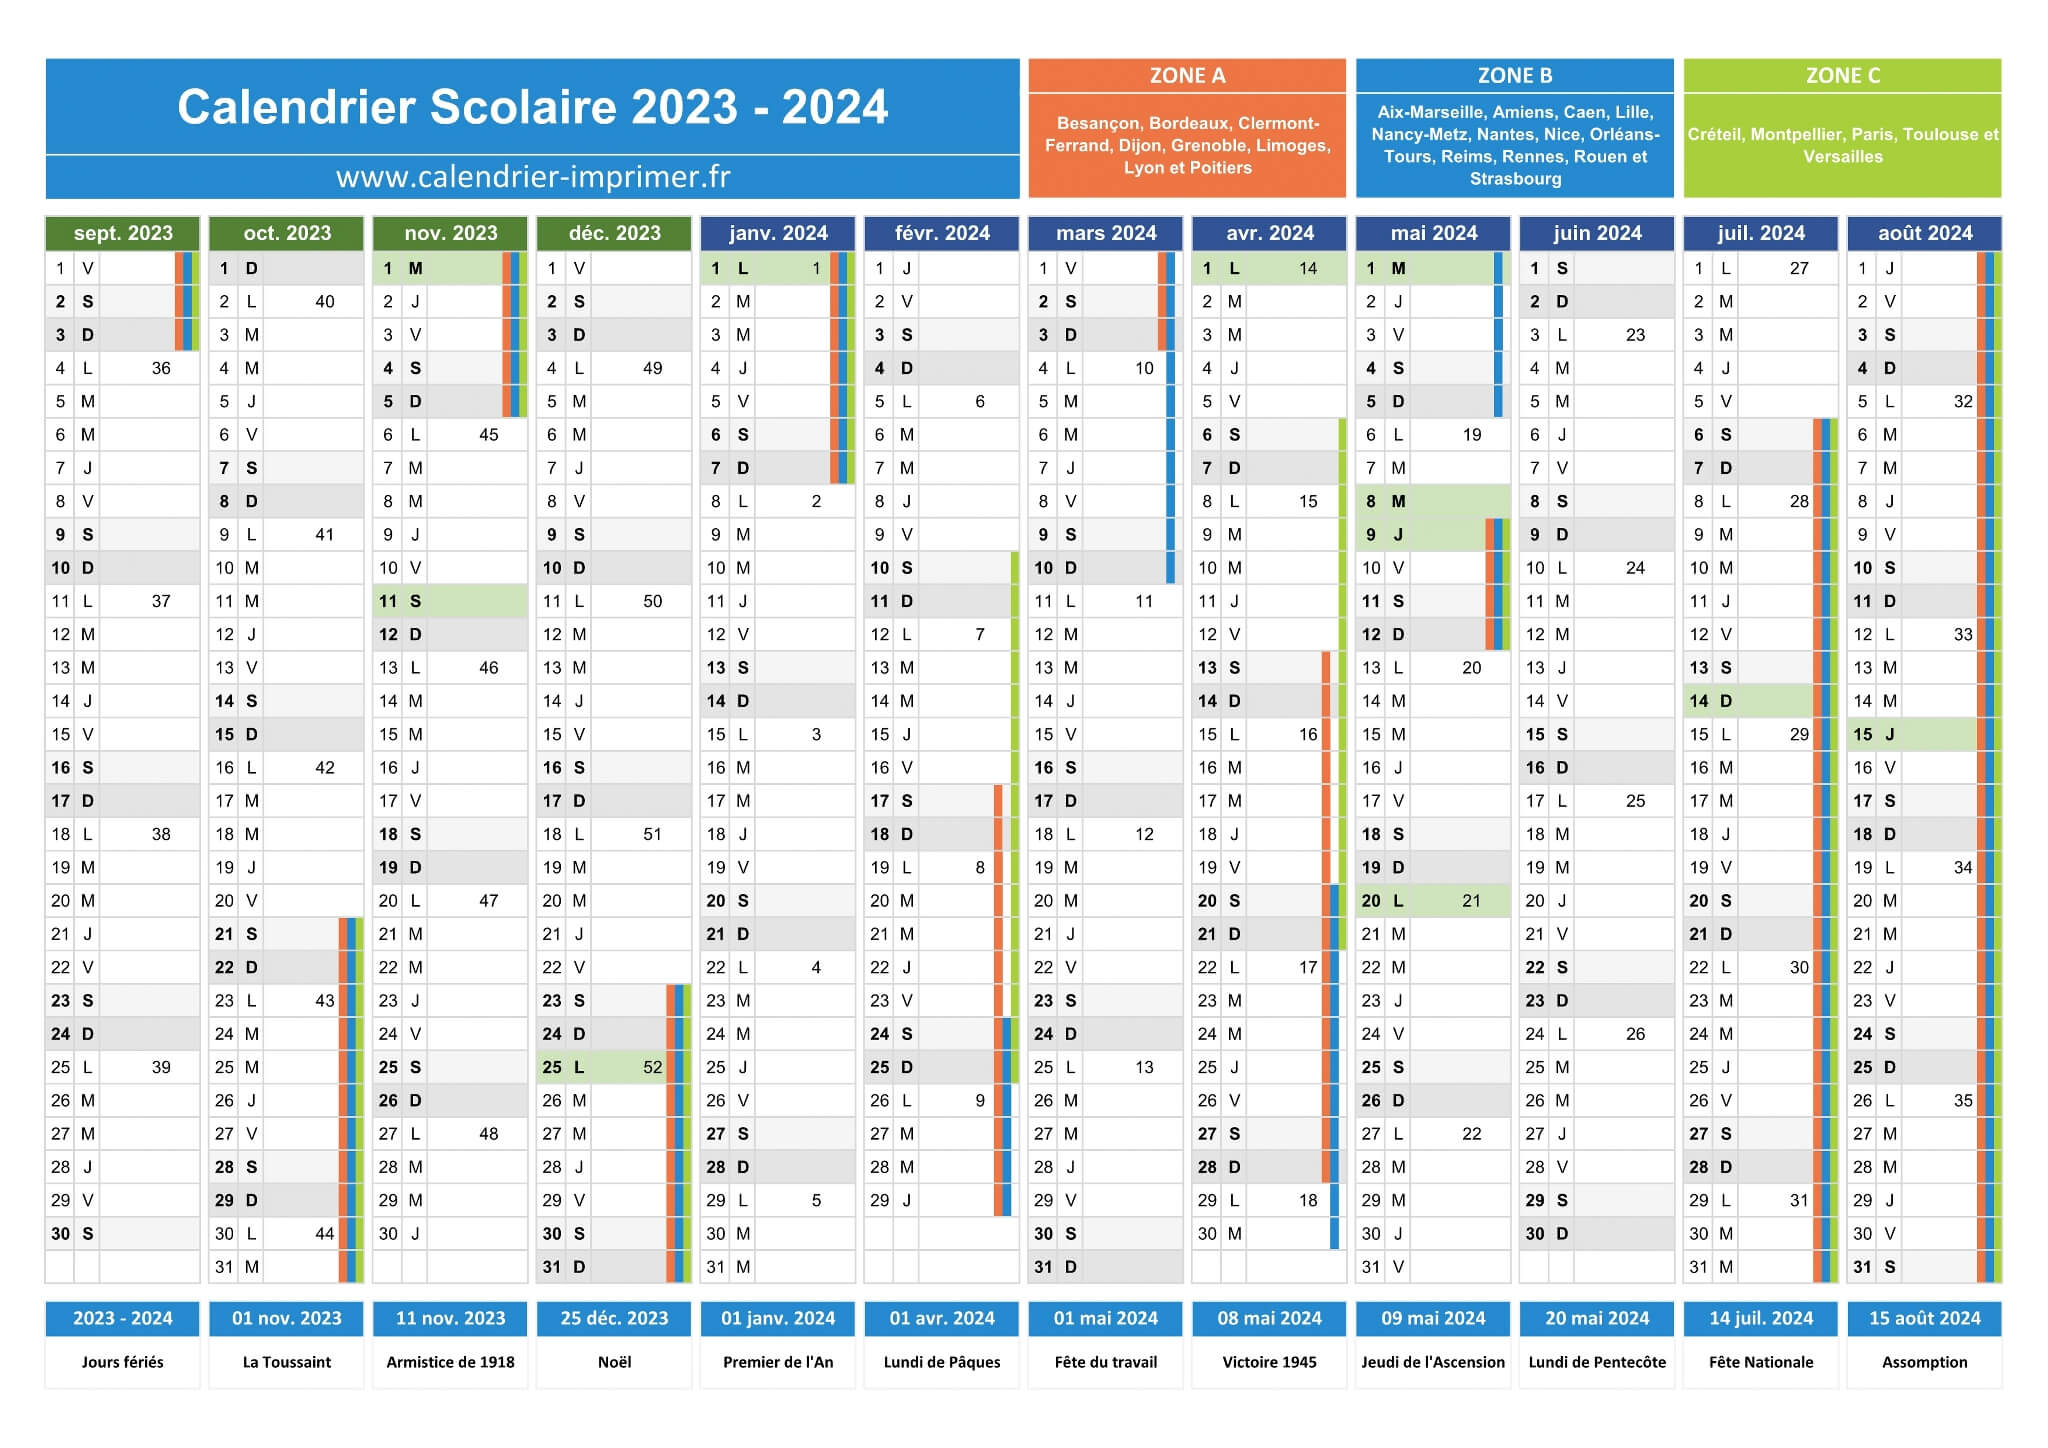 Calendriers scolaires 2023-2024 - DSFNE